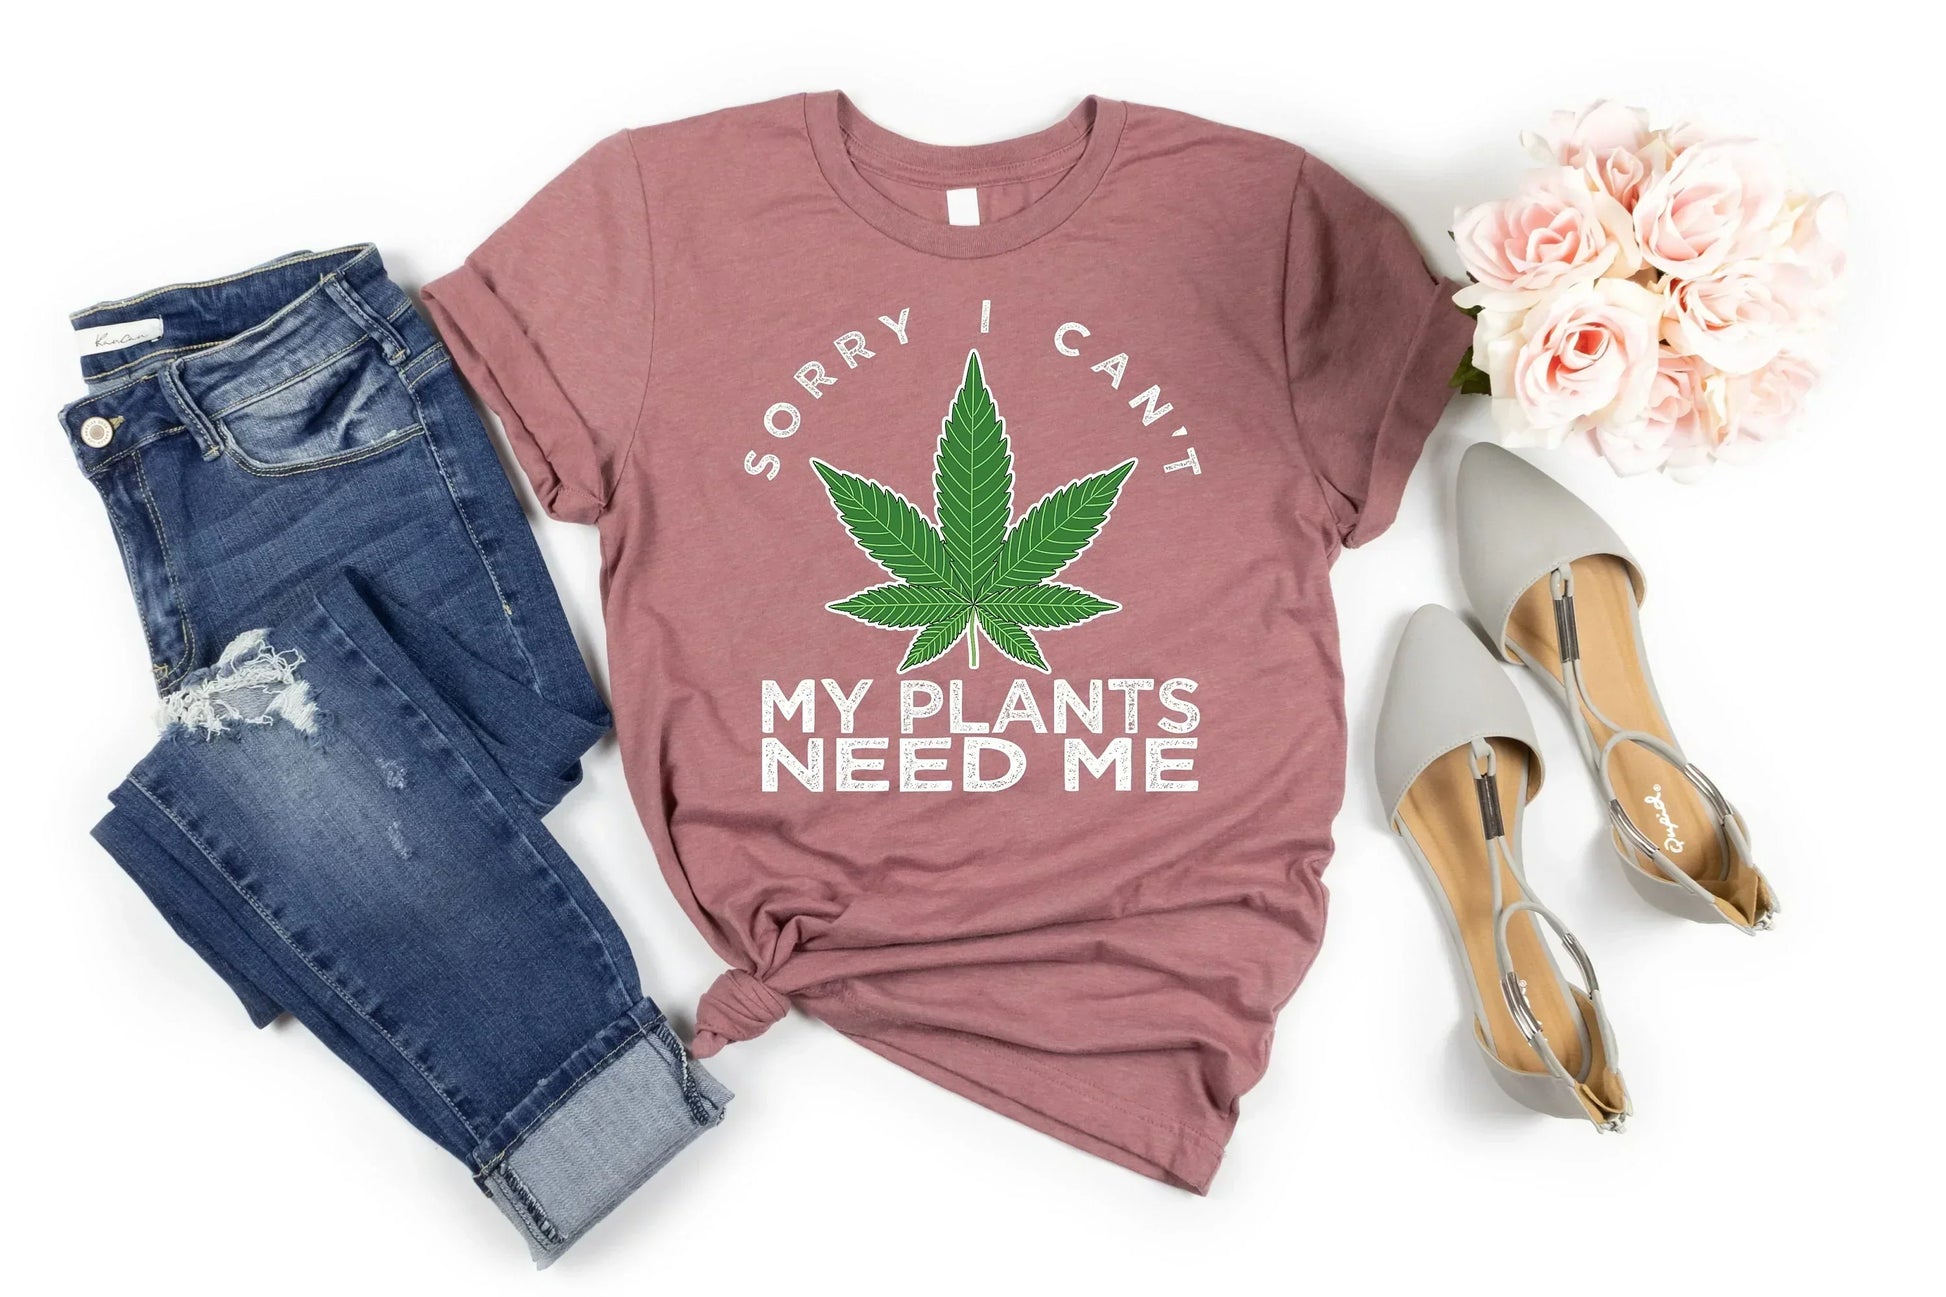 Hippie Clothes | Gift for Stoner Girls, Cannamoms, Crazy Plant Lady Pot Lovers, New Marijuana Smokers, Stoner Gift for Him/Her, Weed Gifts HMDesignStudioUS